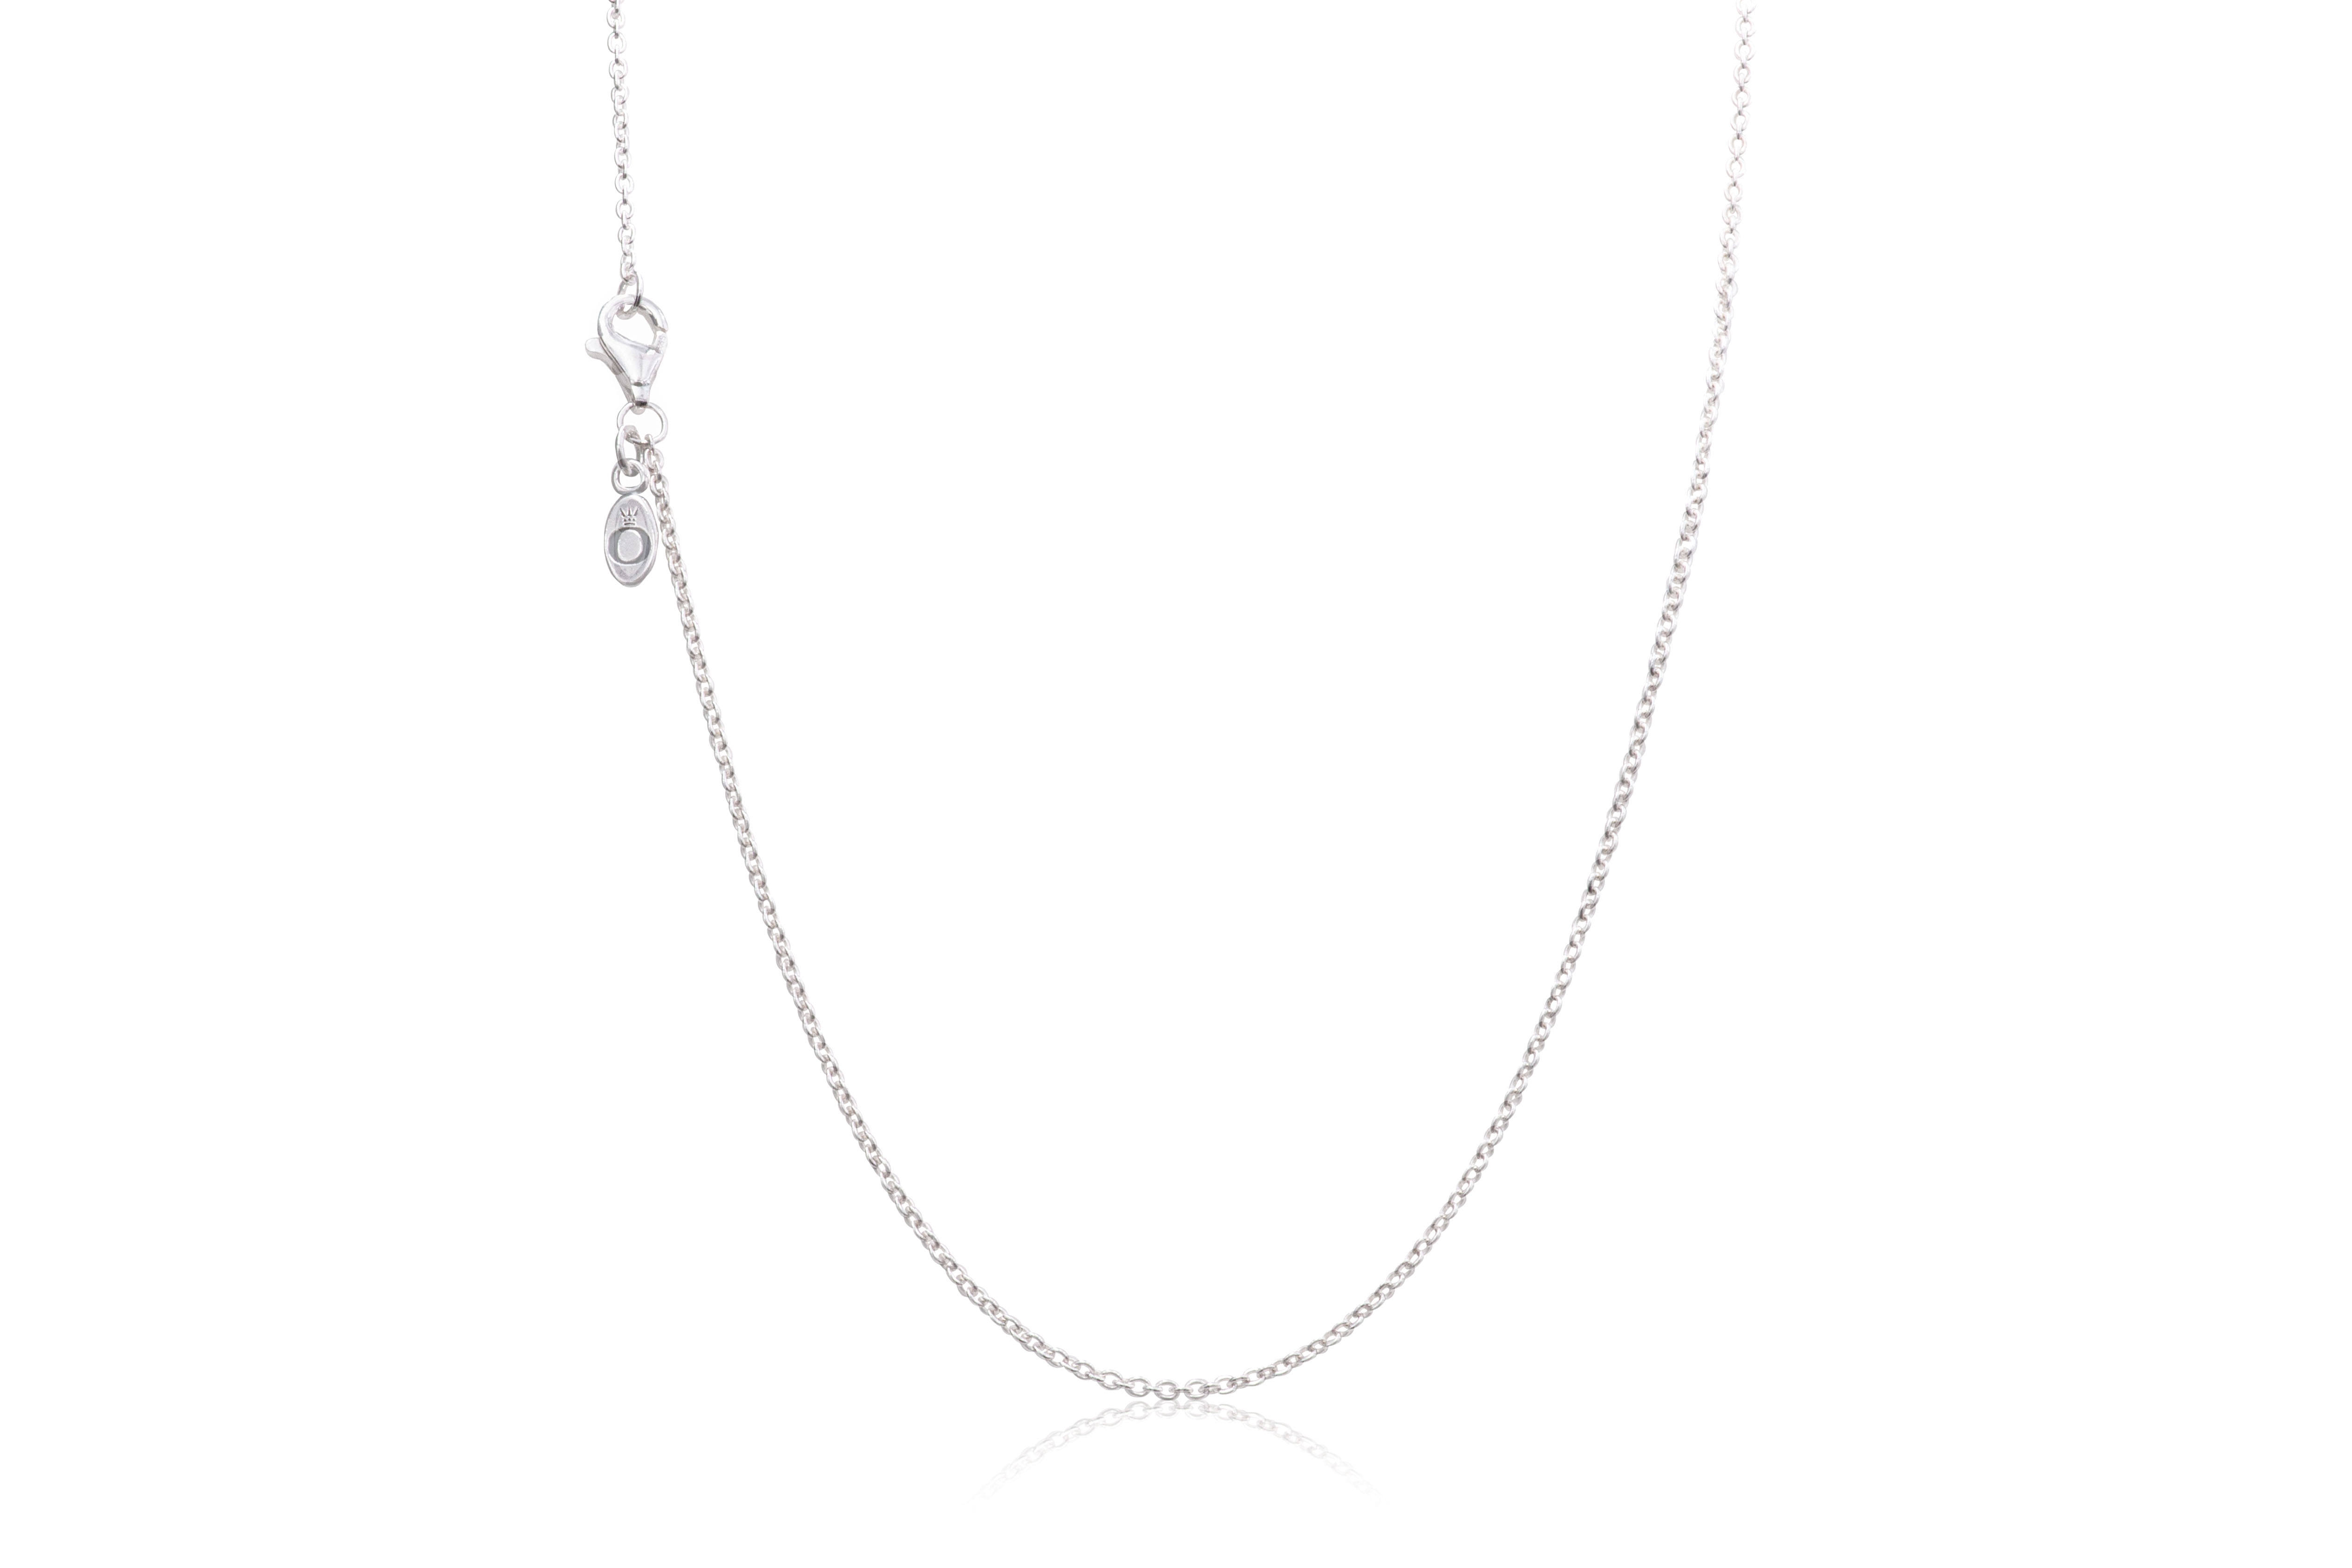 PANDORA Sterling Silver Chain Necklace - Adjustable - 590412-90